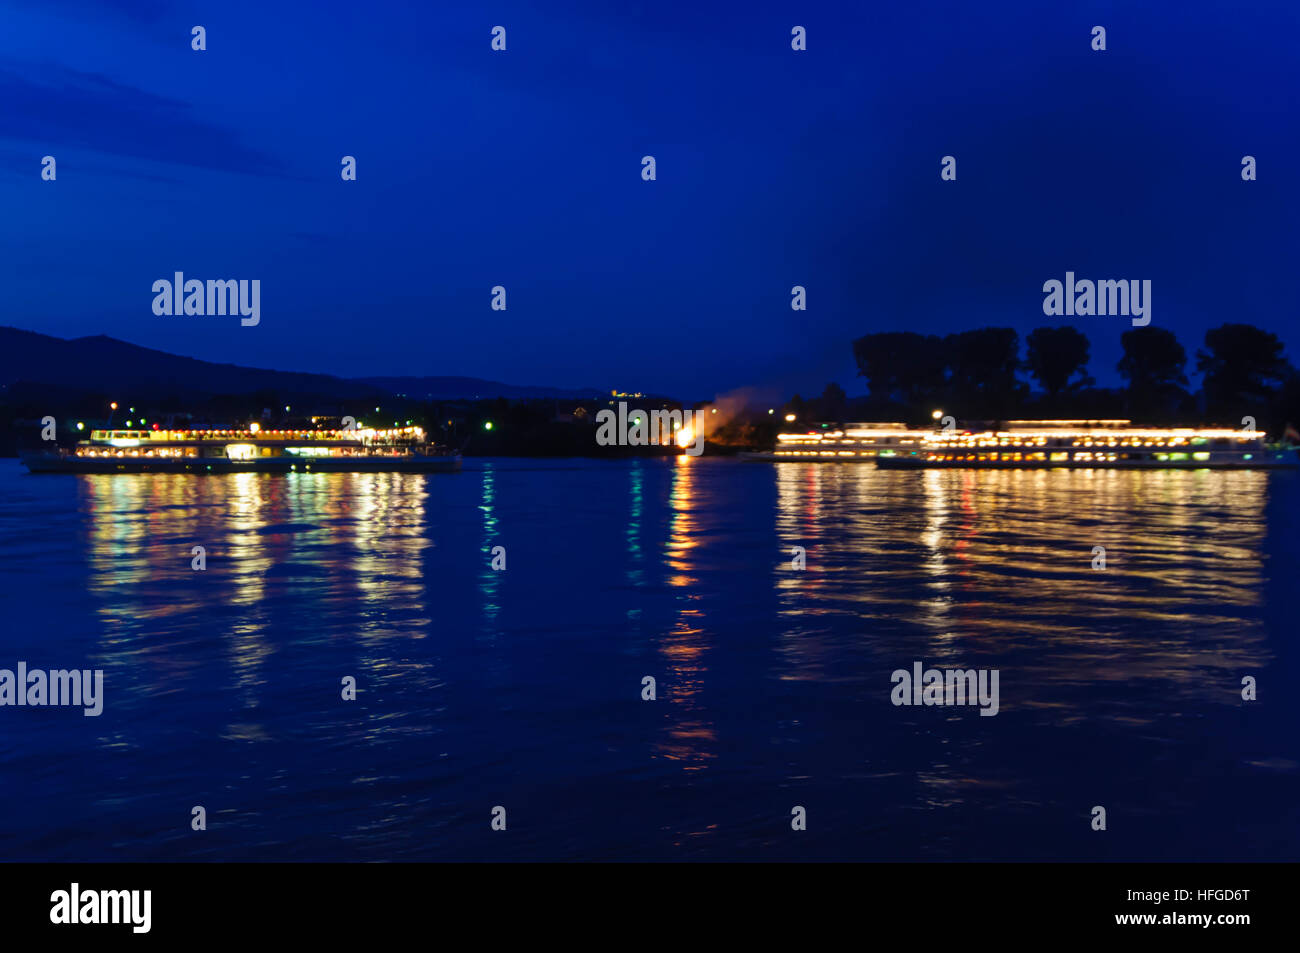 Persenbeug-Gottsdorf: Holiday ships and solstice fires on the Danube in the Nibelungengau, Donau, Niederösterreich, Lower Austria, Austria Stock Photo